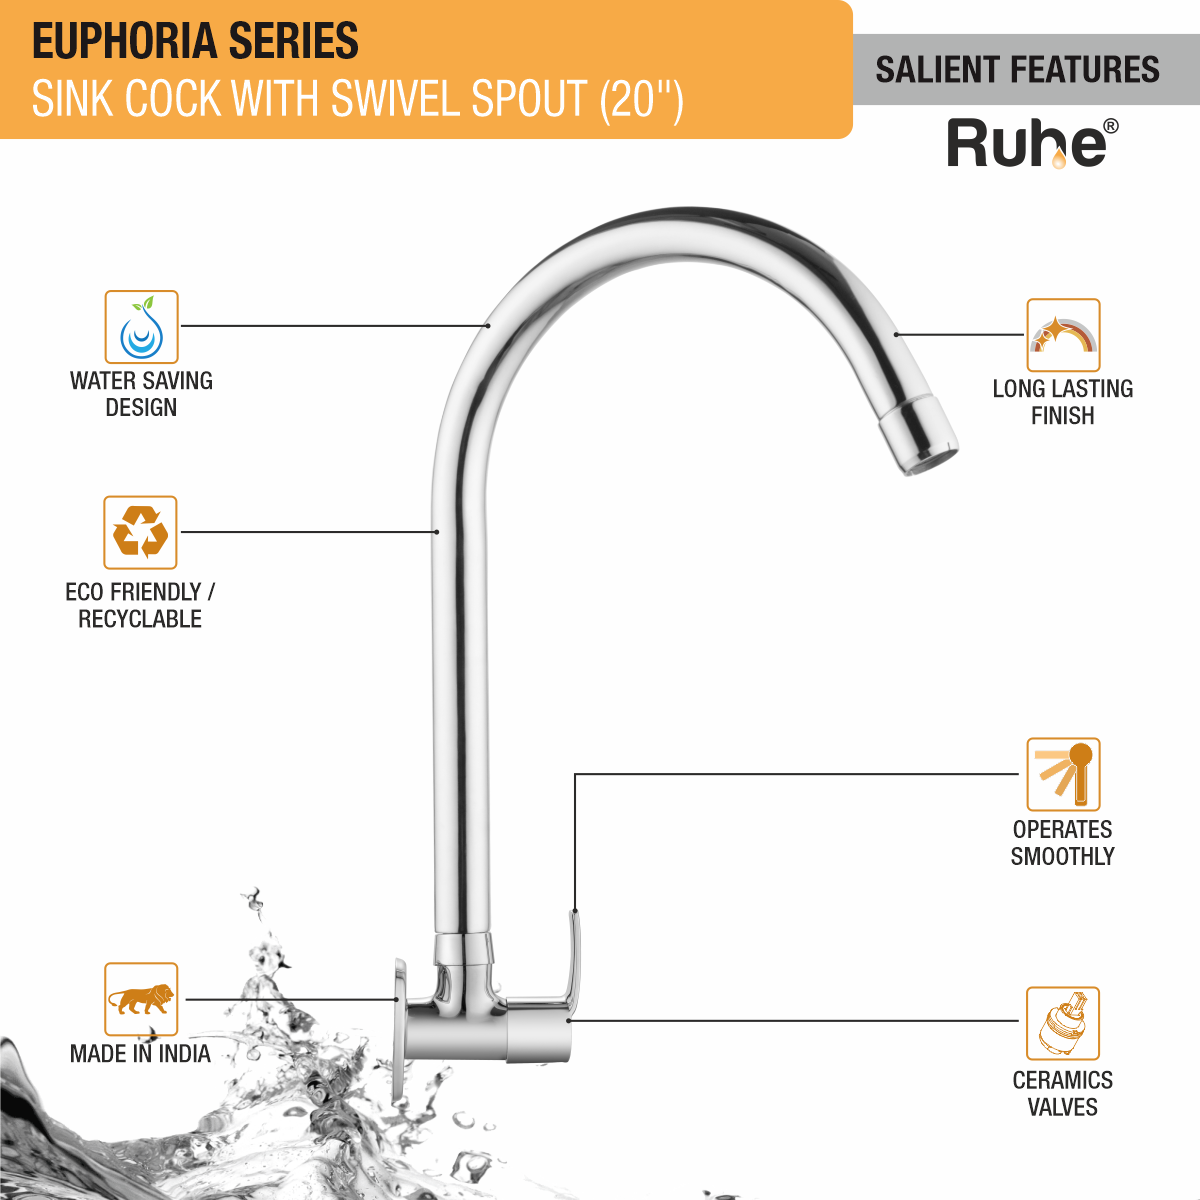 Euphoria Sink Tap with Large (20 inches) Round Swivel Spout Faucet features